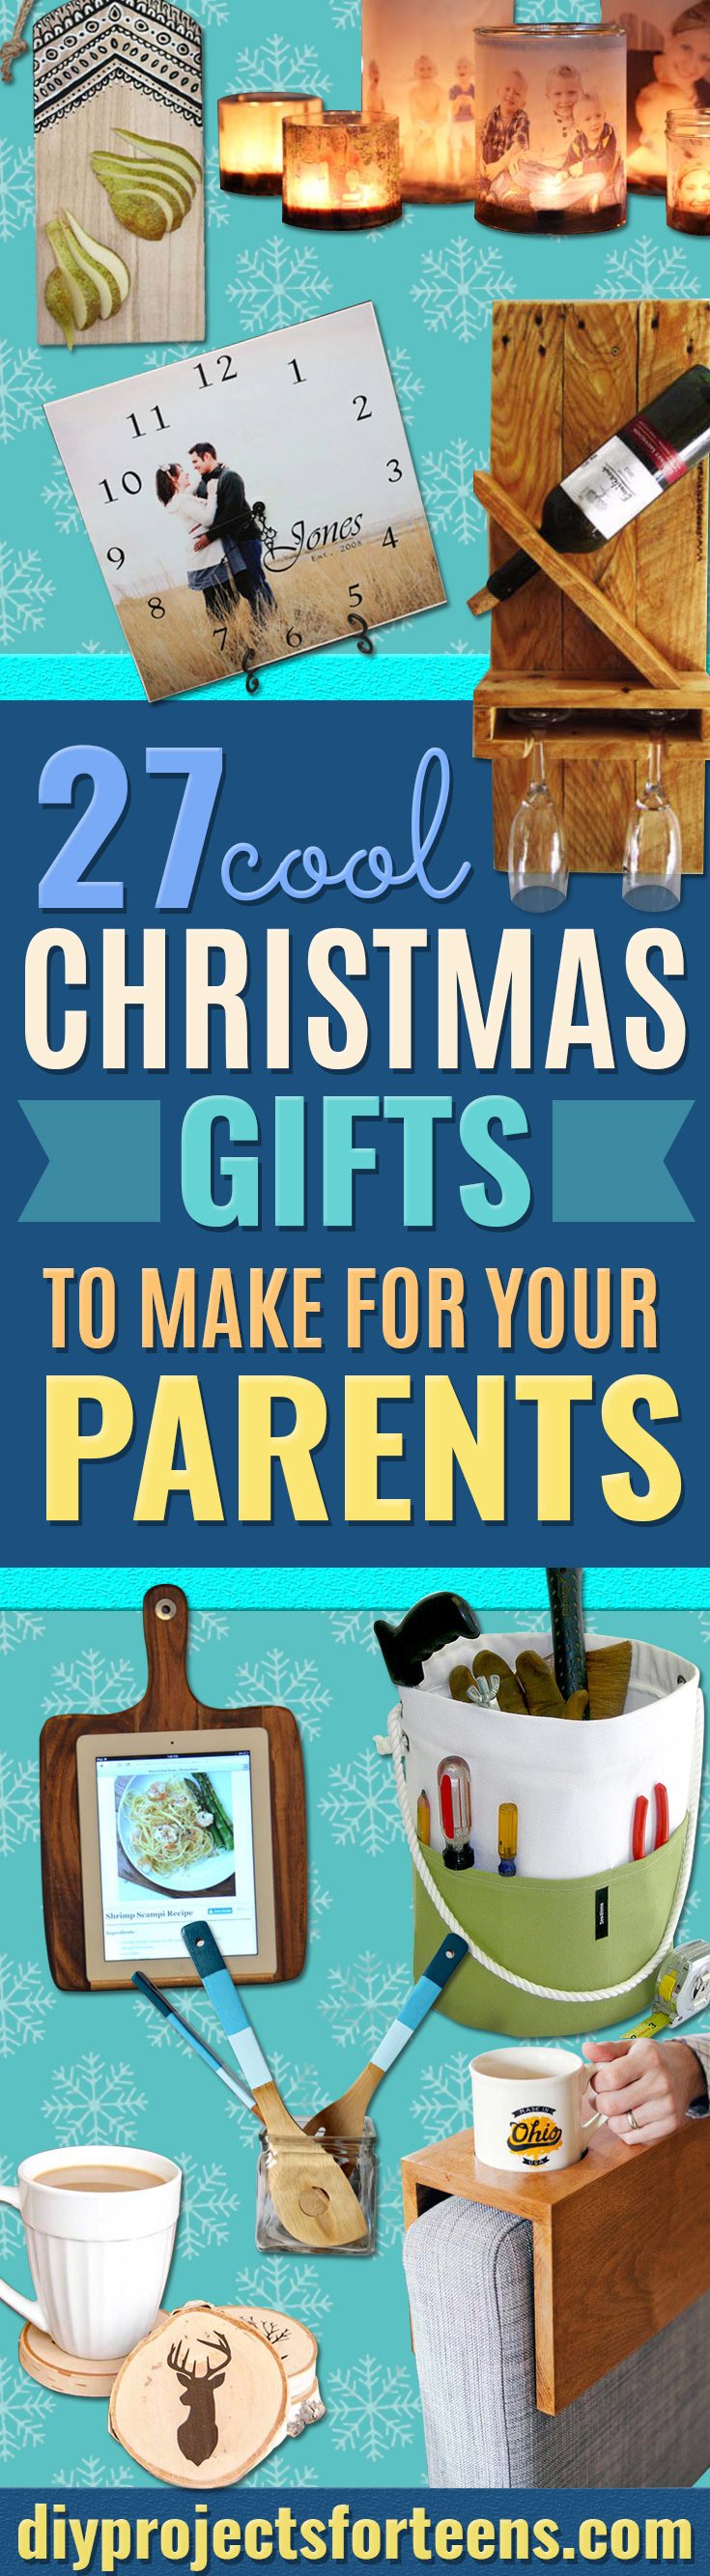 27 Diy Christmas Gifts For Mom And Dad Creative Presents To Make For Parents,White Grasscloth Peel And Stick Wallpaper